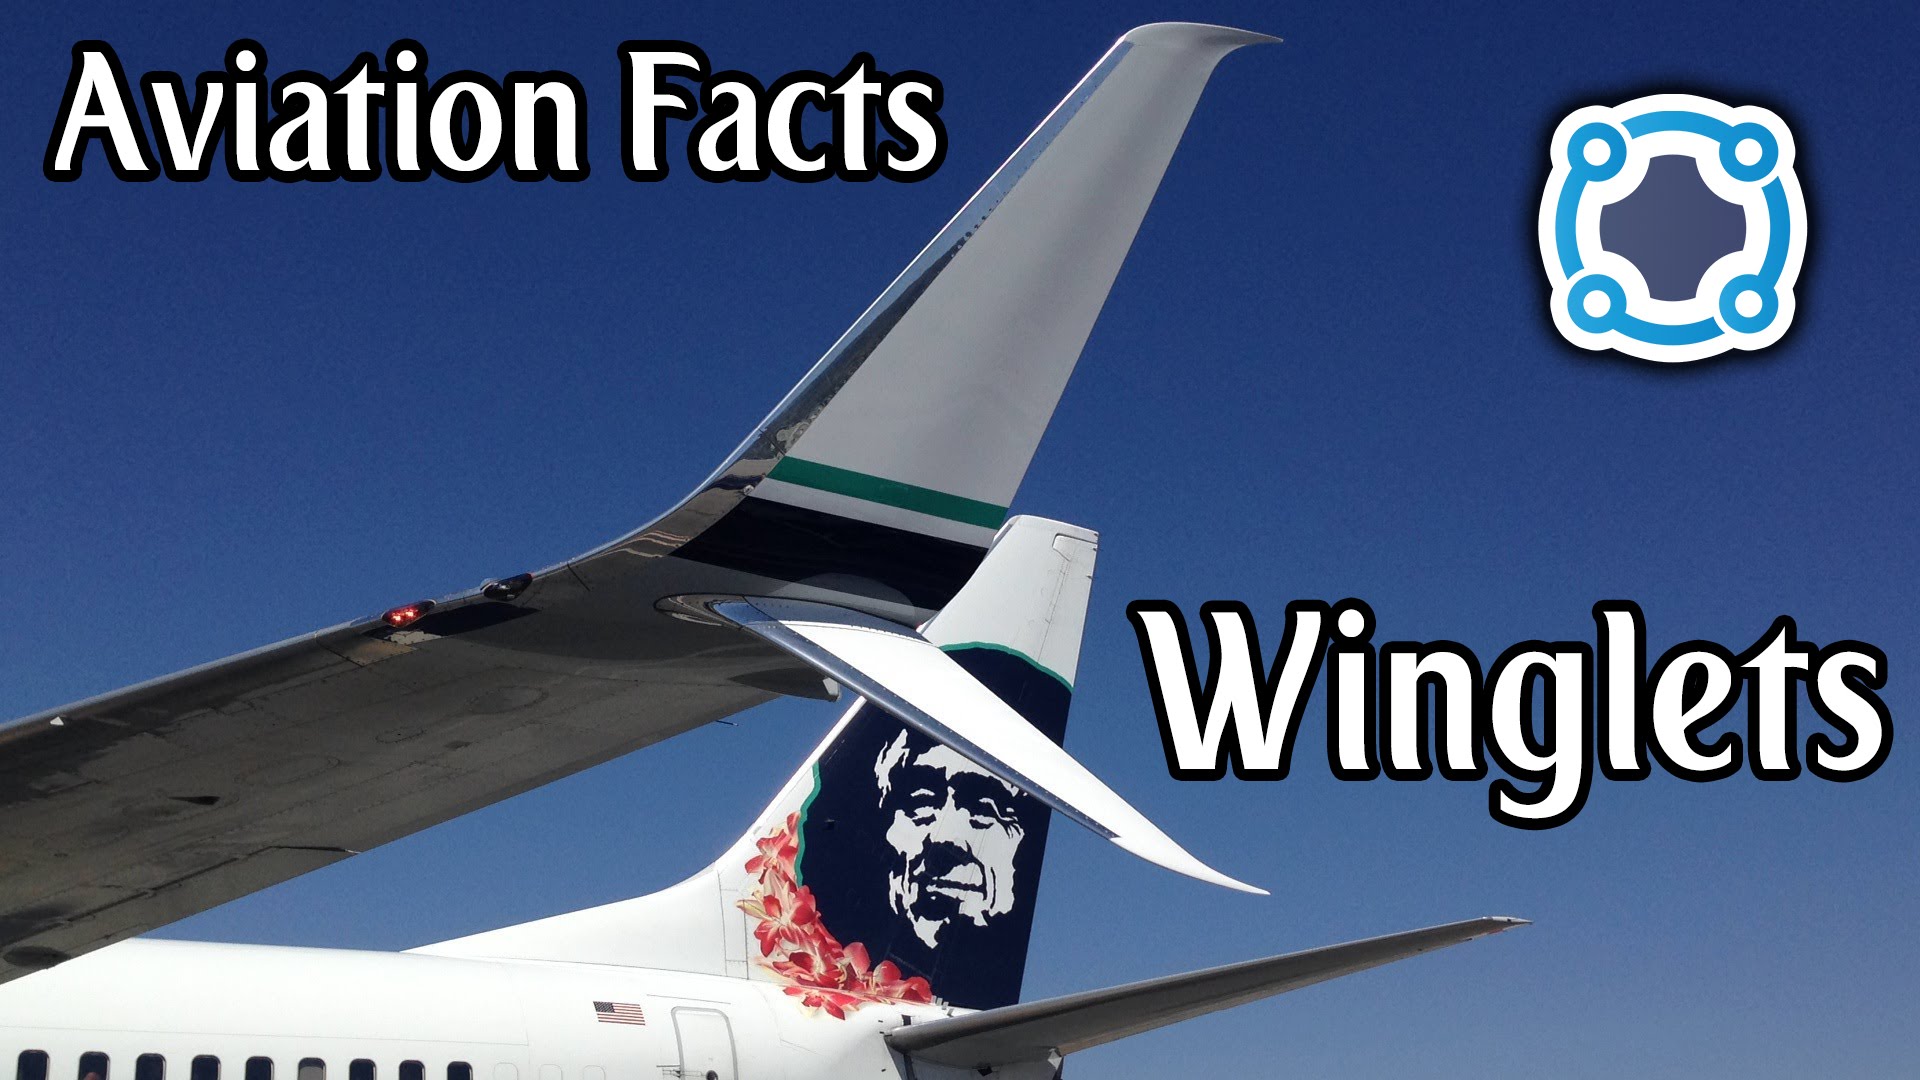 How Do Winglets Work?